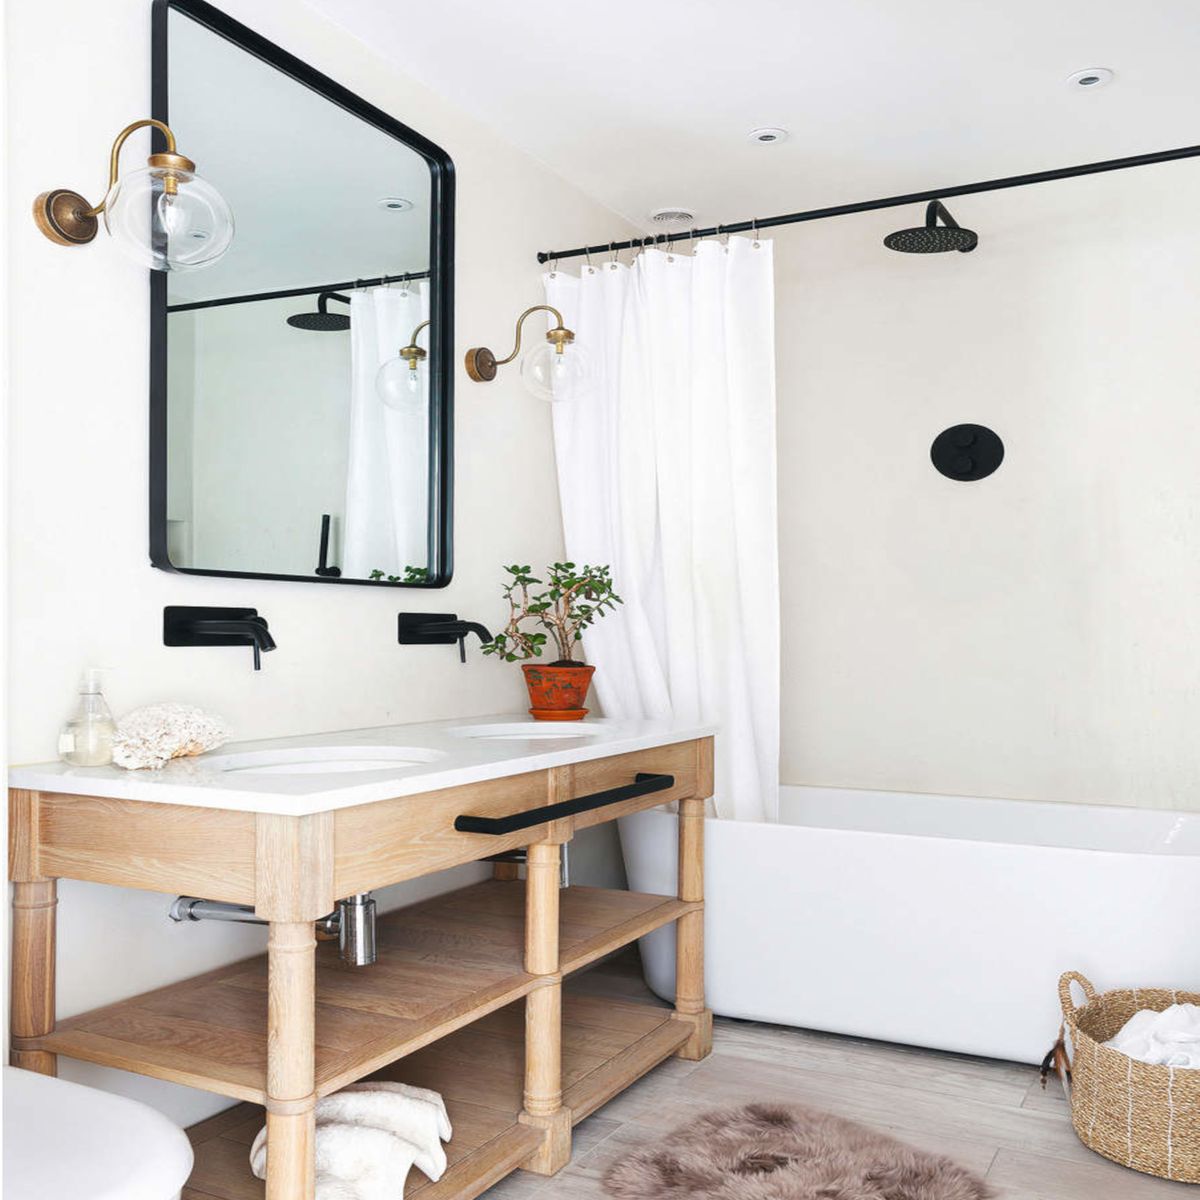 Bathroom storage ideas to keep your bathroom clutter-free | Ideal Home